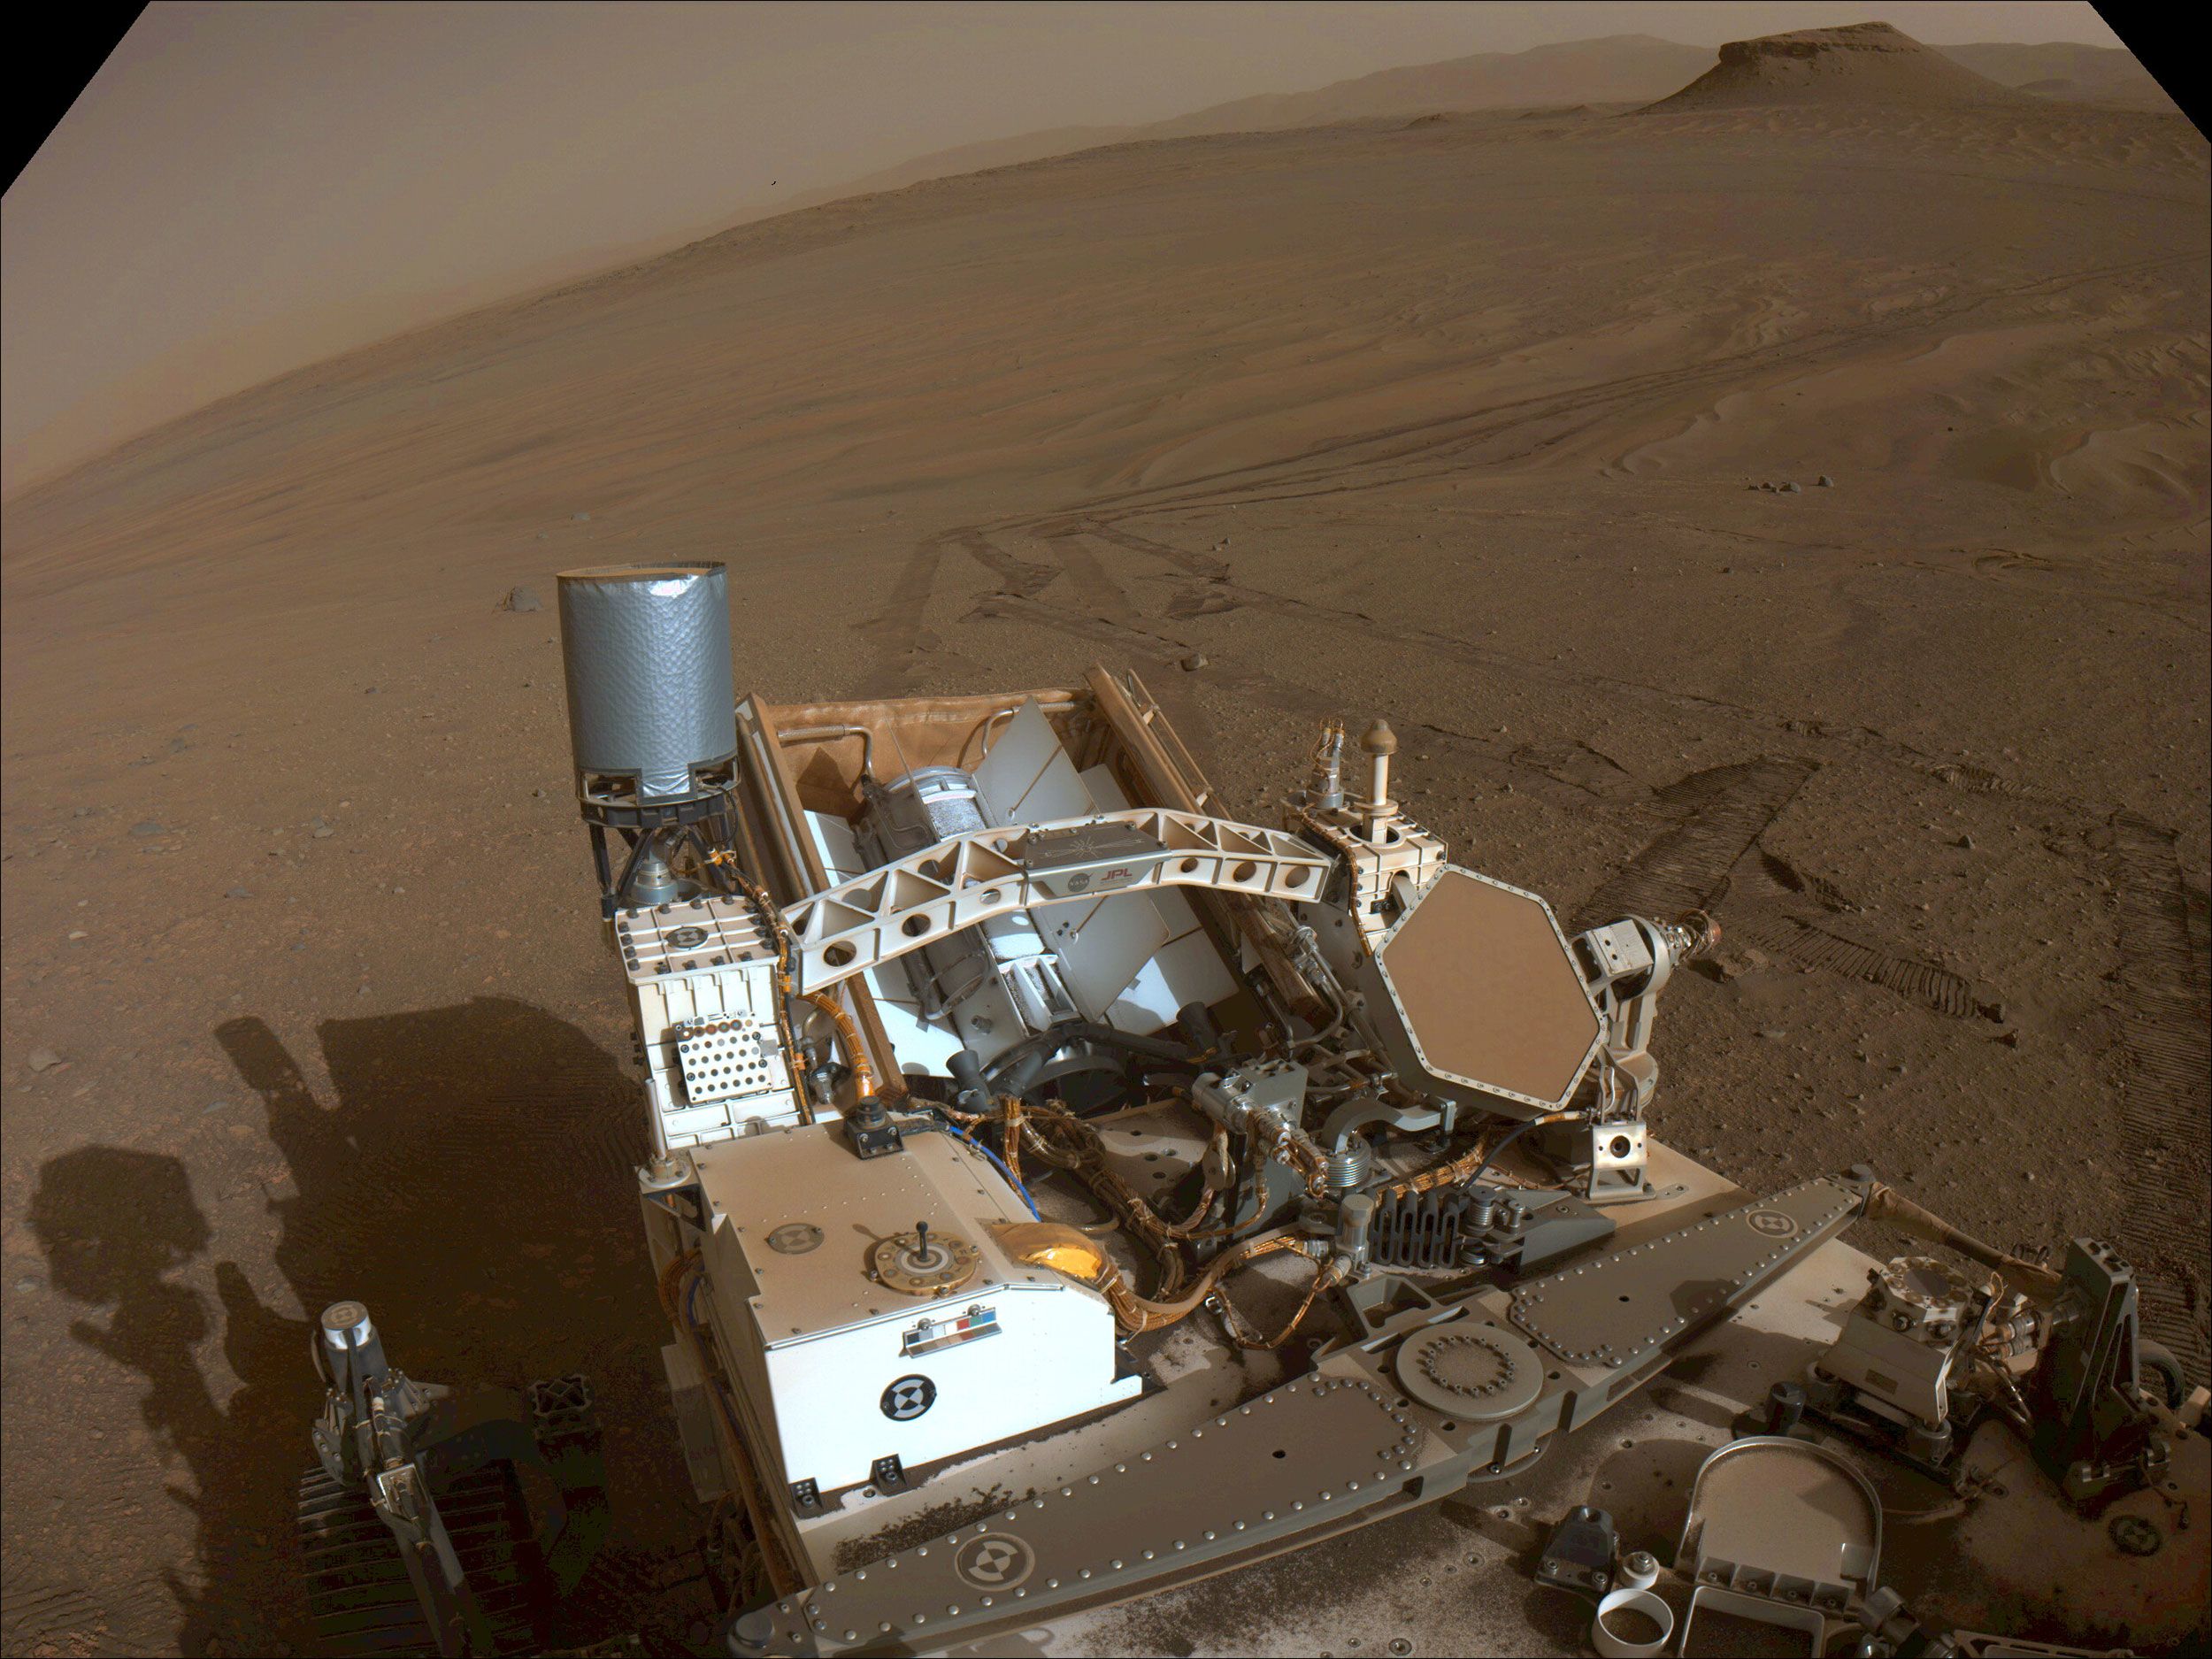 Opinion: Precious samples from Mars have been collected. Now it’s up to Congress to get them back - Science - News